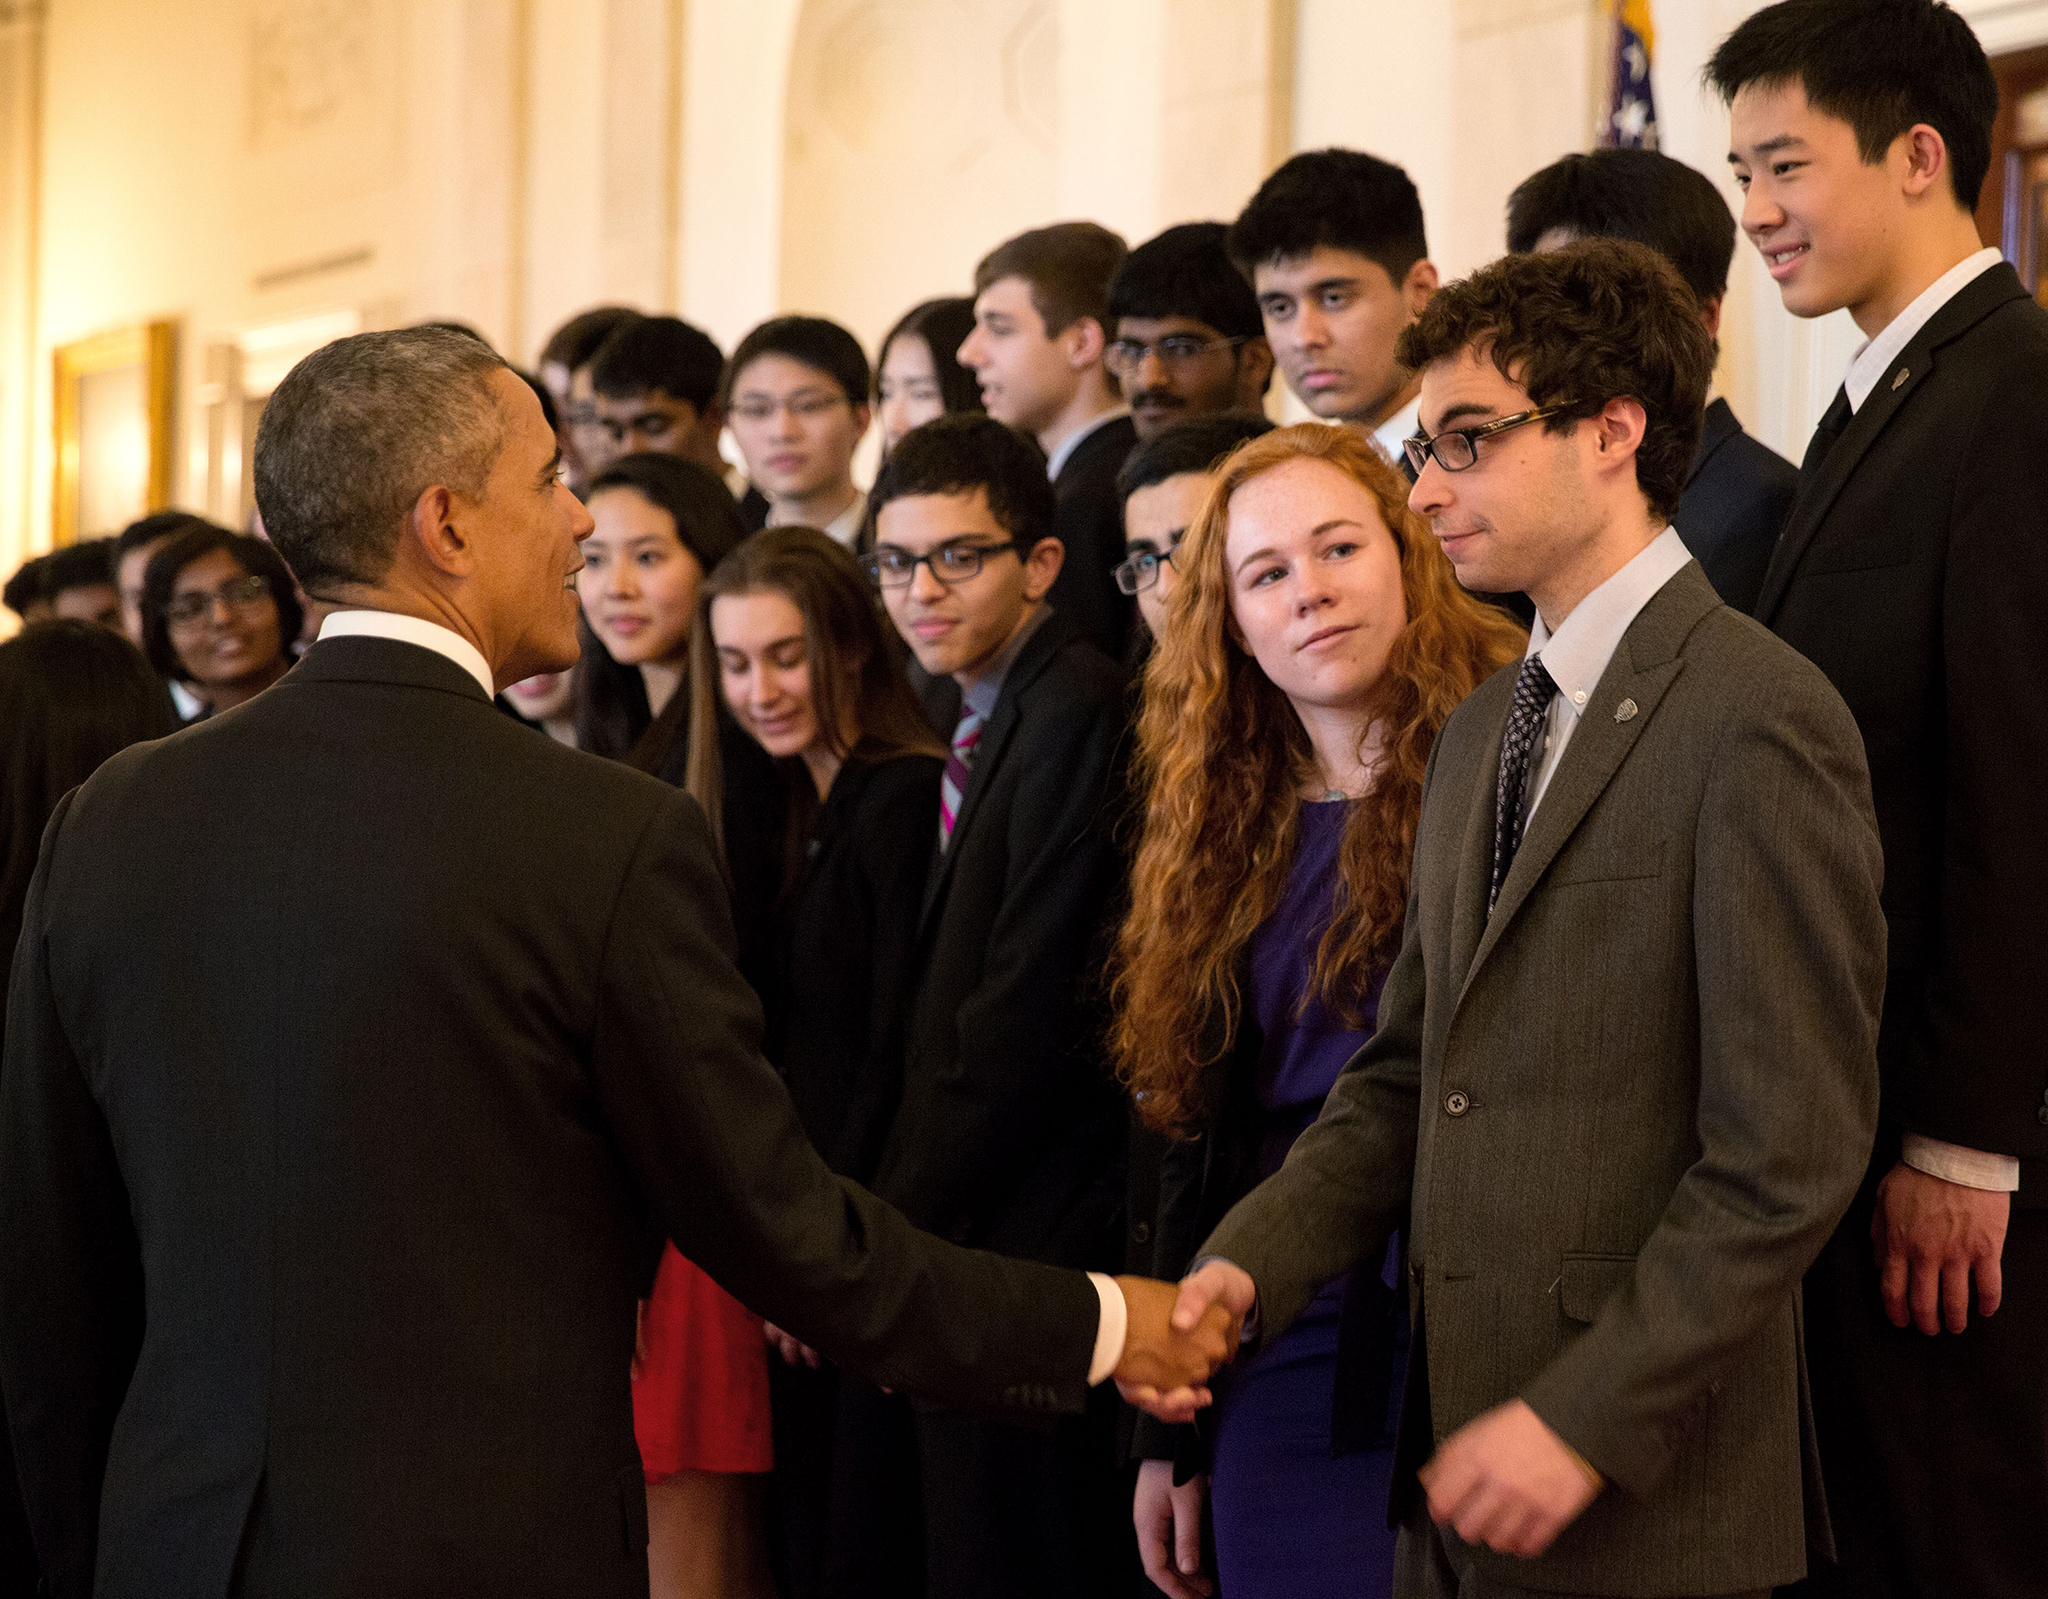 STS finalist Michael Winer meets President Obama